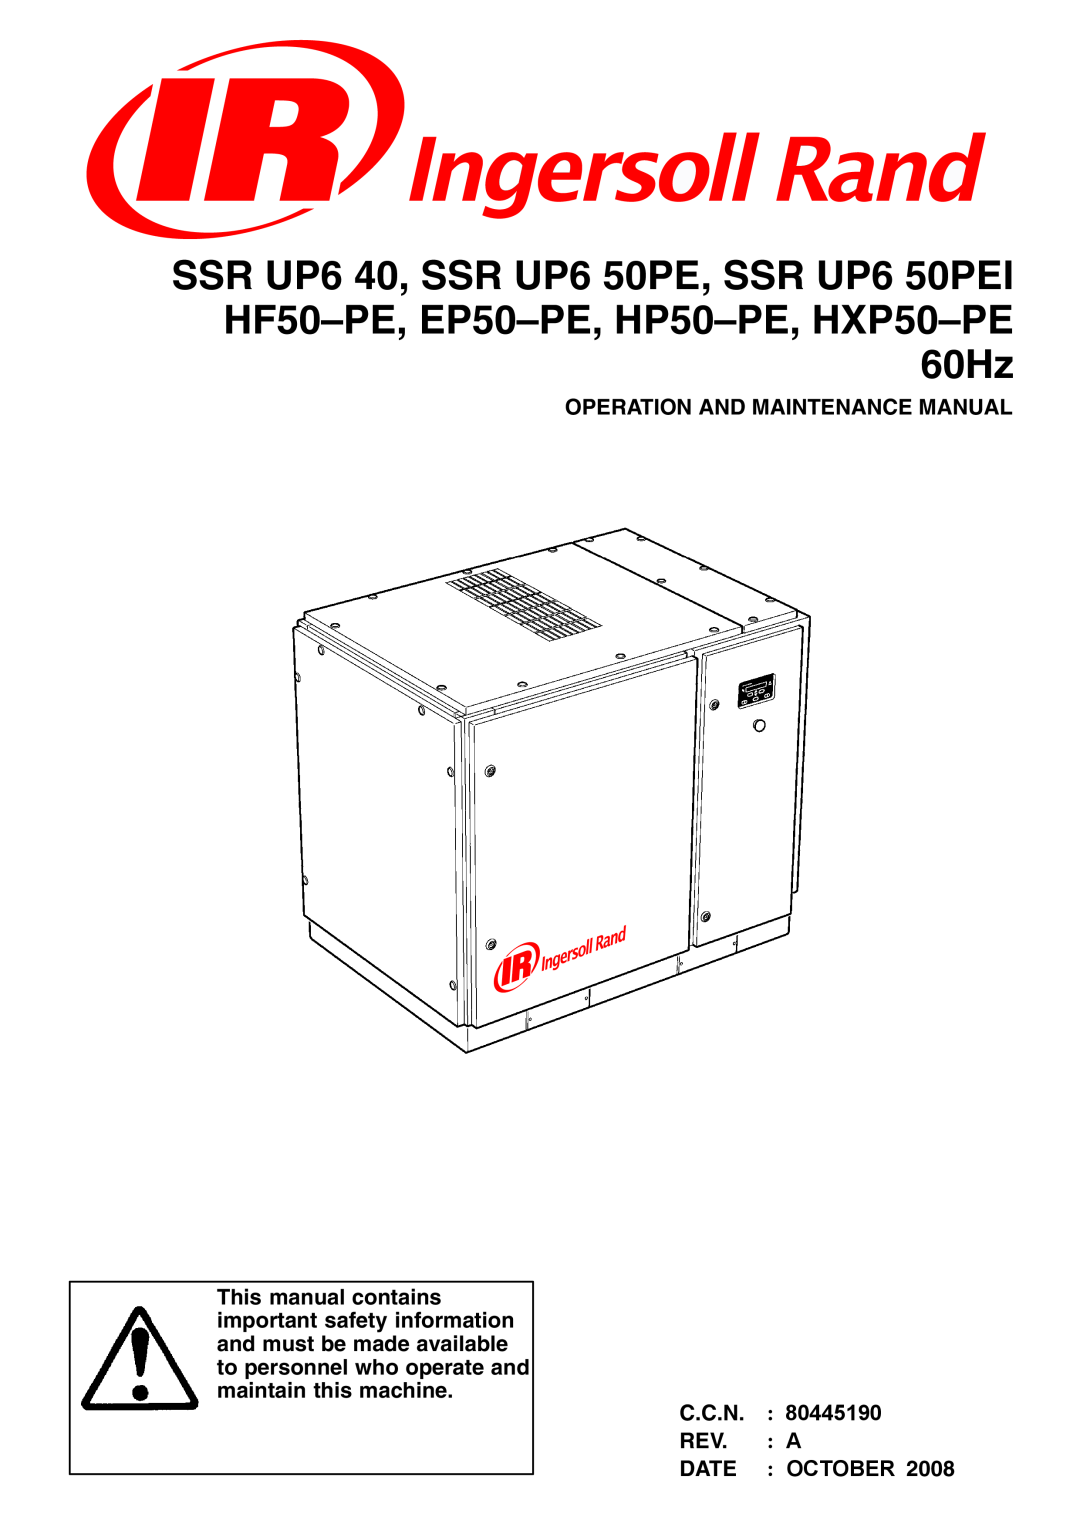 Ingersoll-Rand SSR UP6 50PE, SSR UP6 40, EP50-PE manual Operation And Maintenance Manual, C.C.N, 80445190, Date, October 